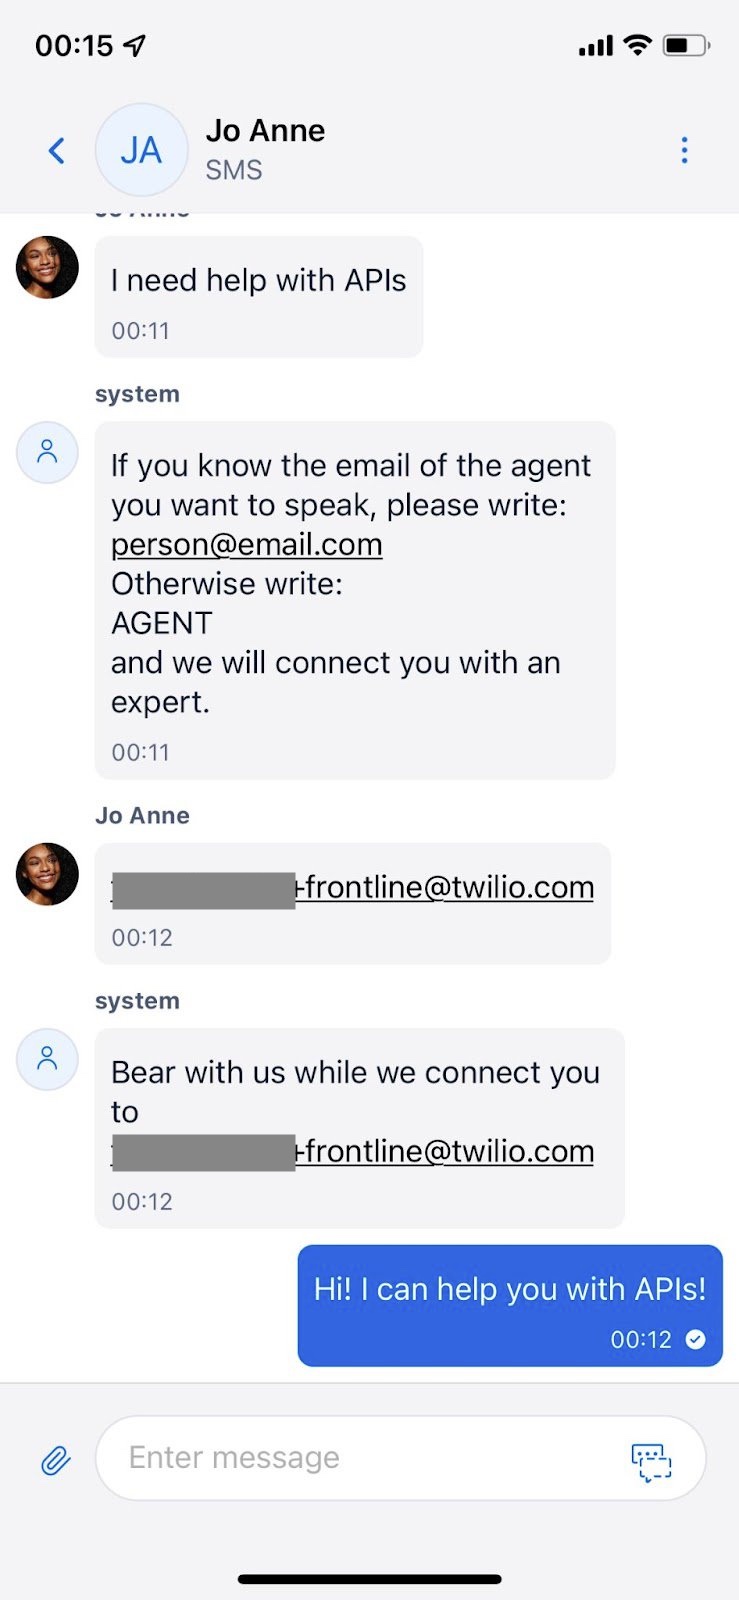 Connecting a customer to an expert using a bot and Twilio Frontline